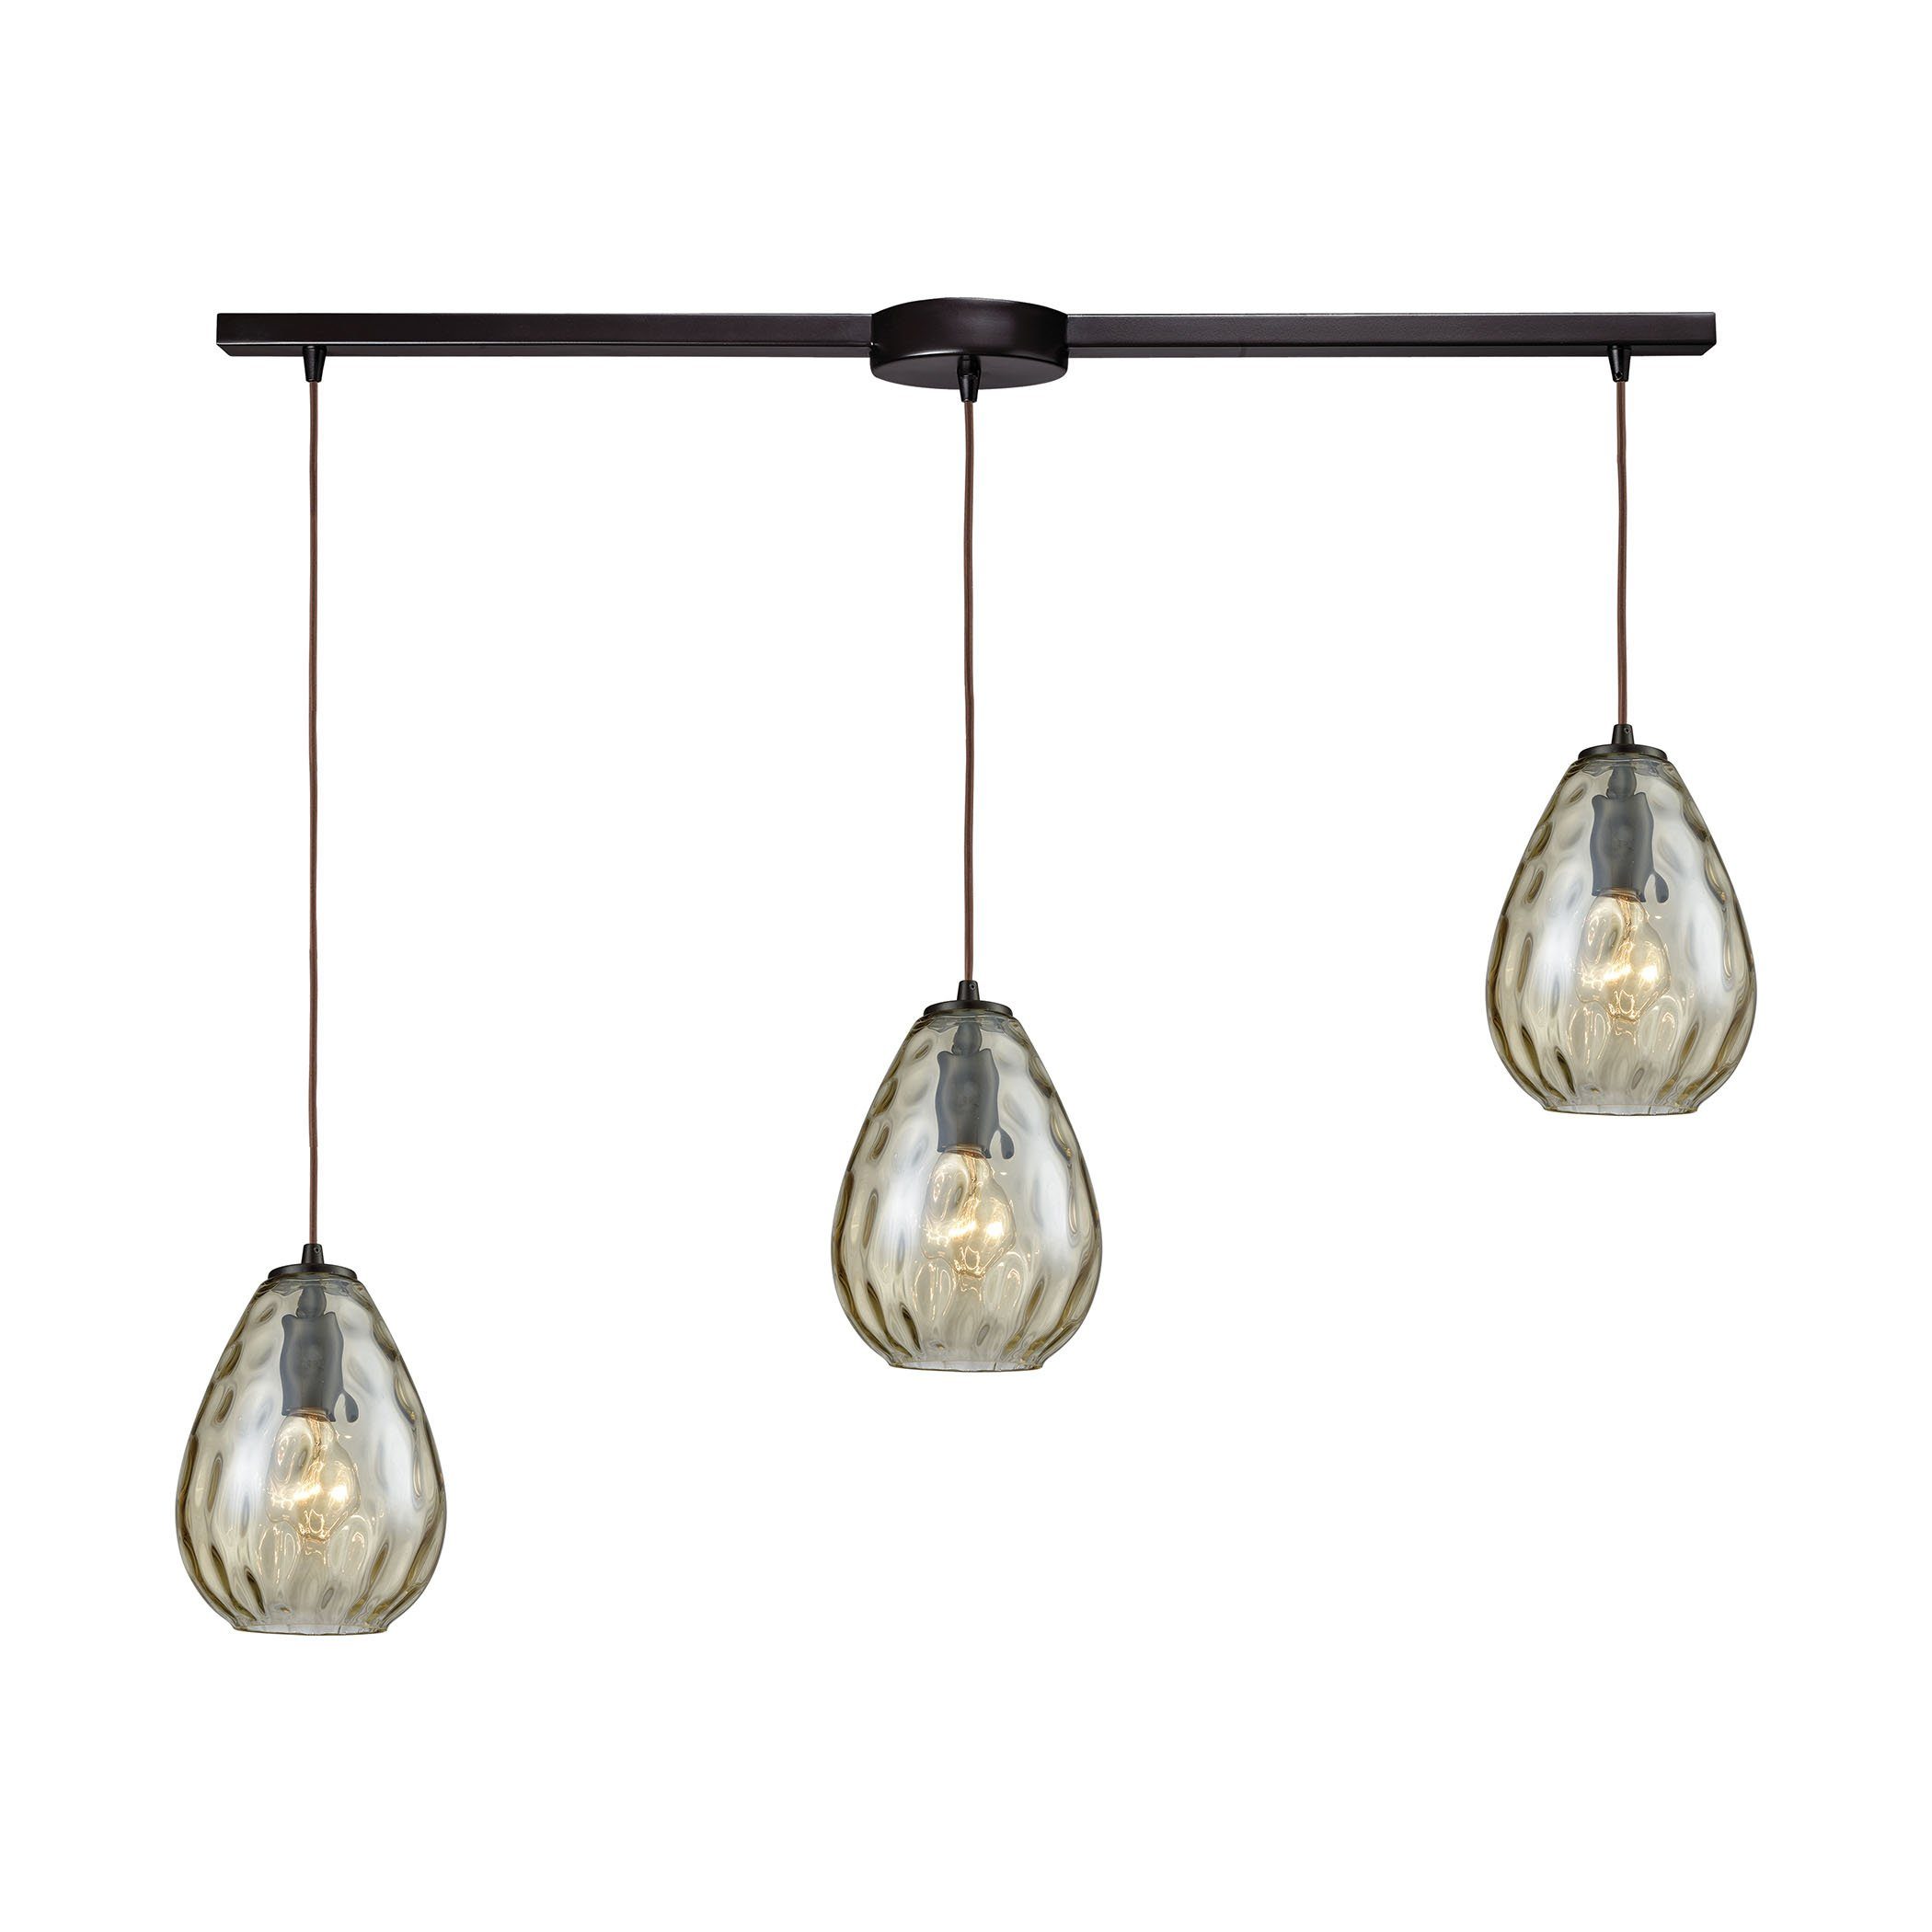 Lagoon 3-Light Linear Bar In Oil Rubbed Bronze With Champagne Plated Water Glass Pendant Ceiling Elk Lighting 